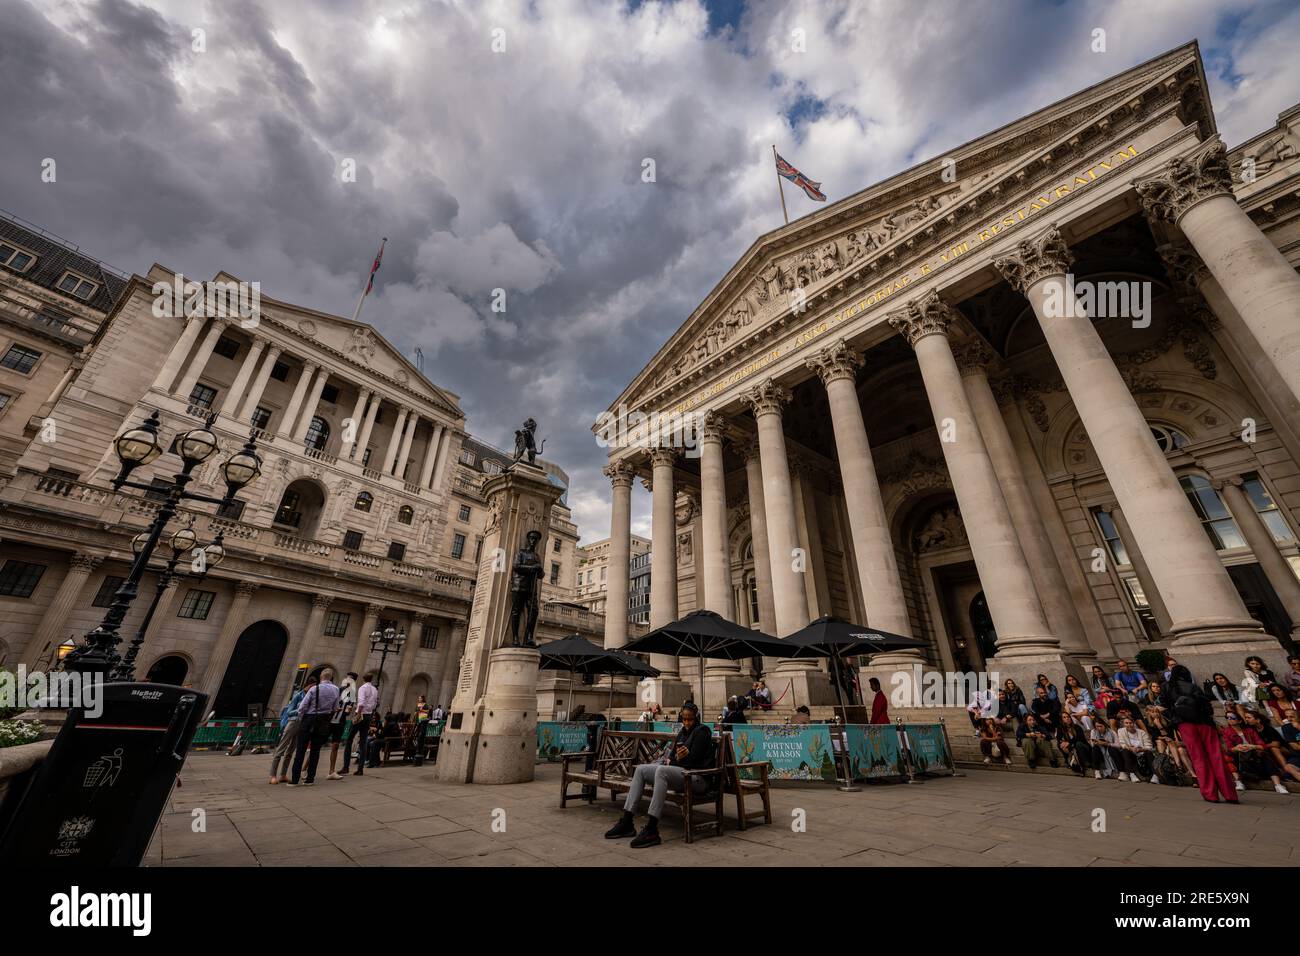 London, UK: The Bank of England on Threadneedle Street in the City of London (L) and The Royal Exchange (R). People in foreground. Stock Photo